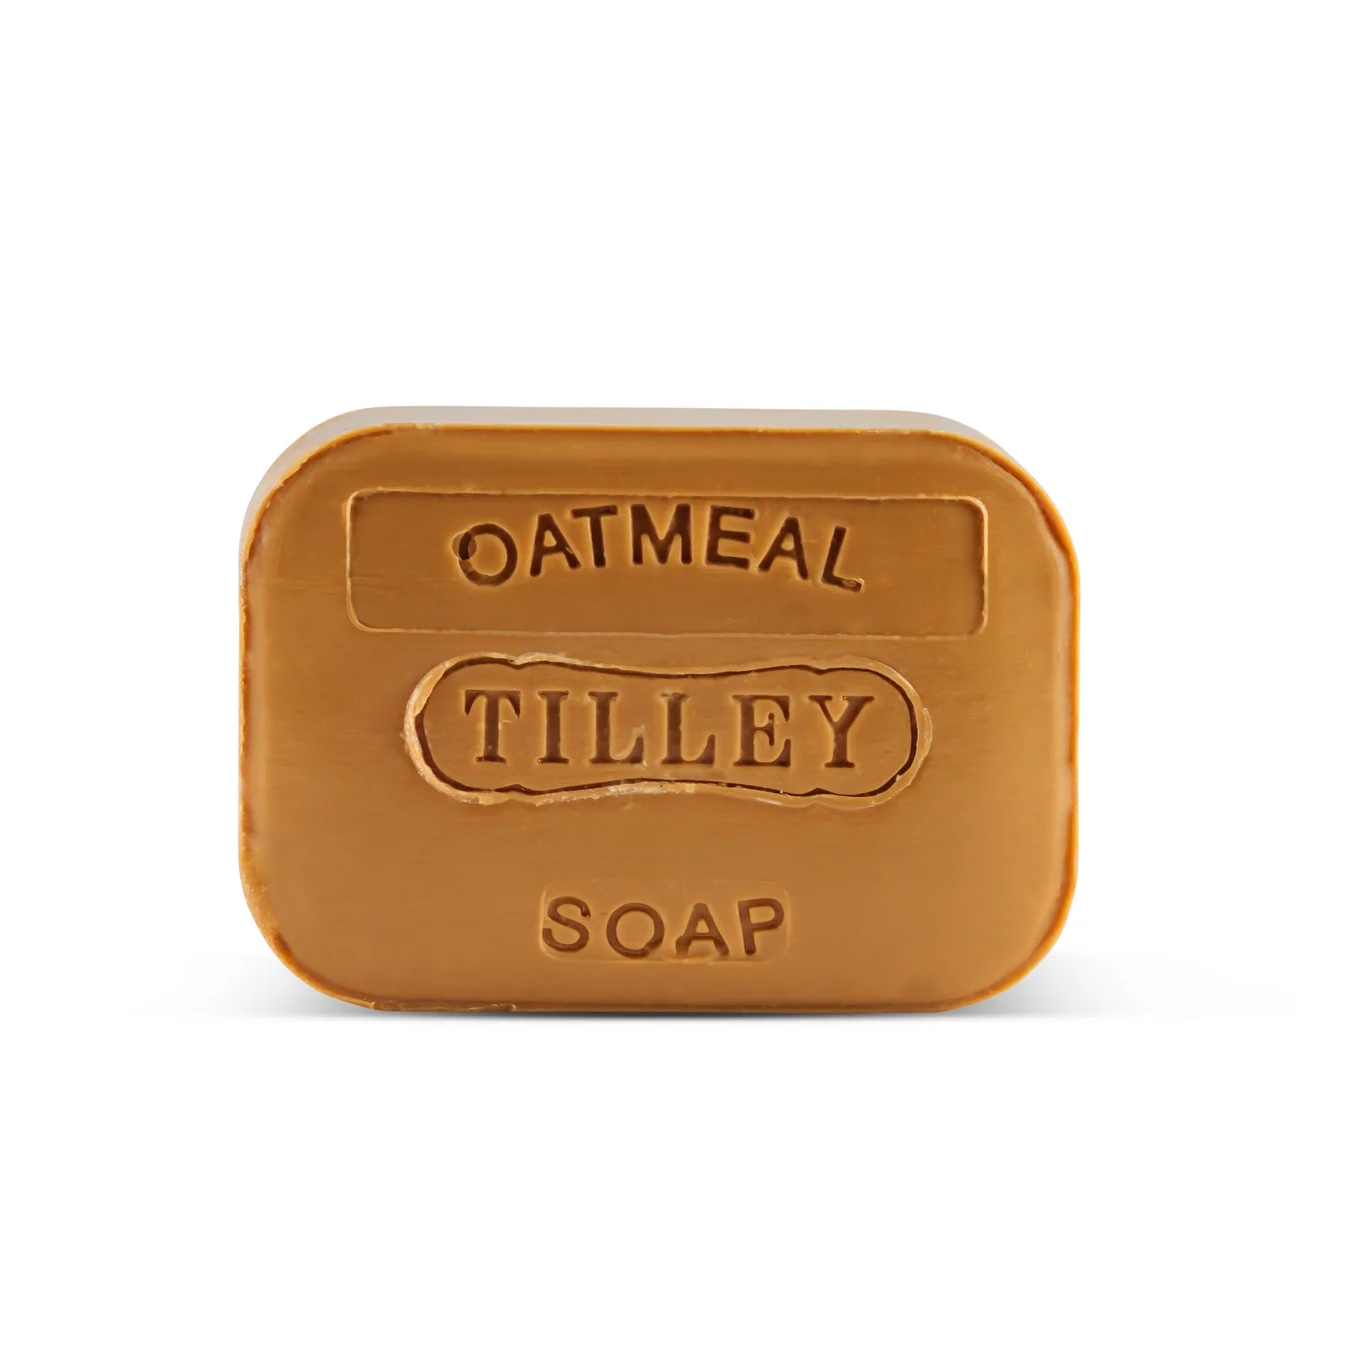 Tilley Oatmeal Soap (Stamped) 100g